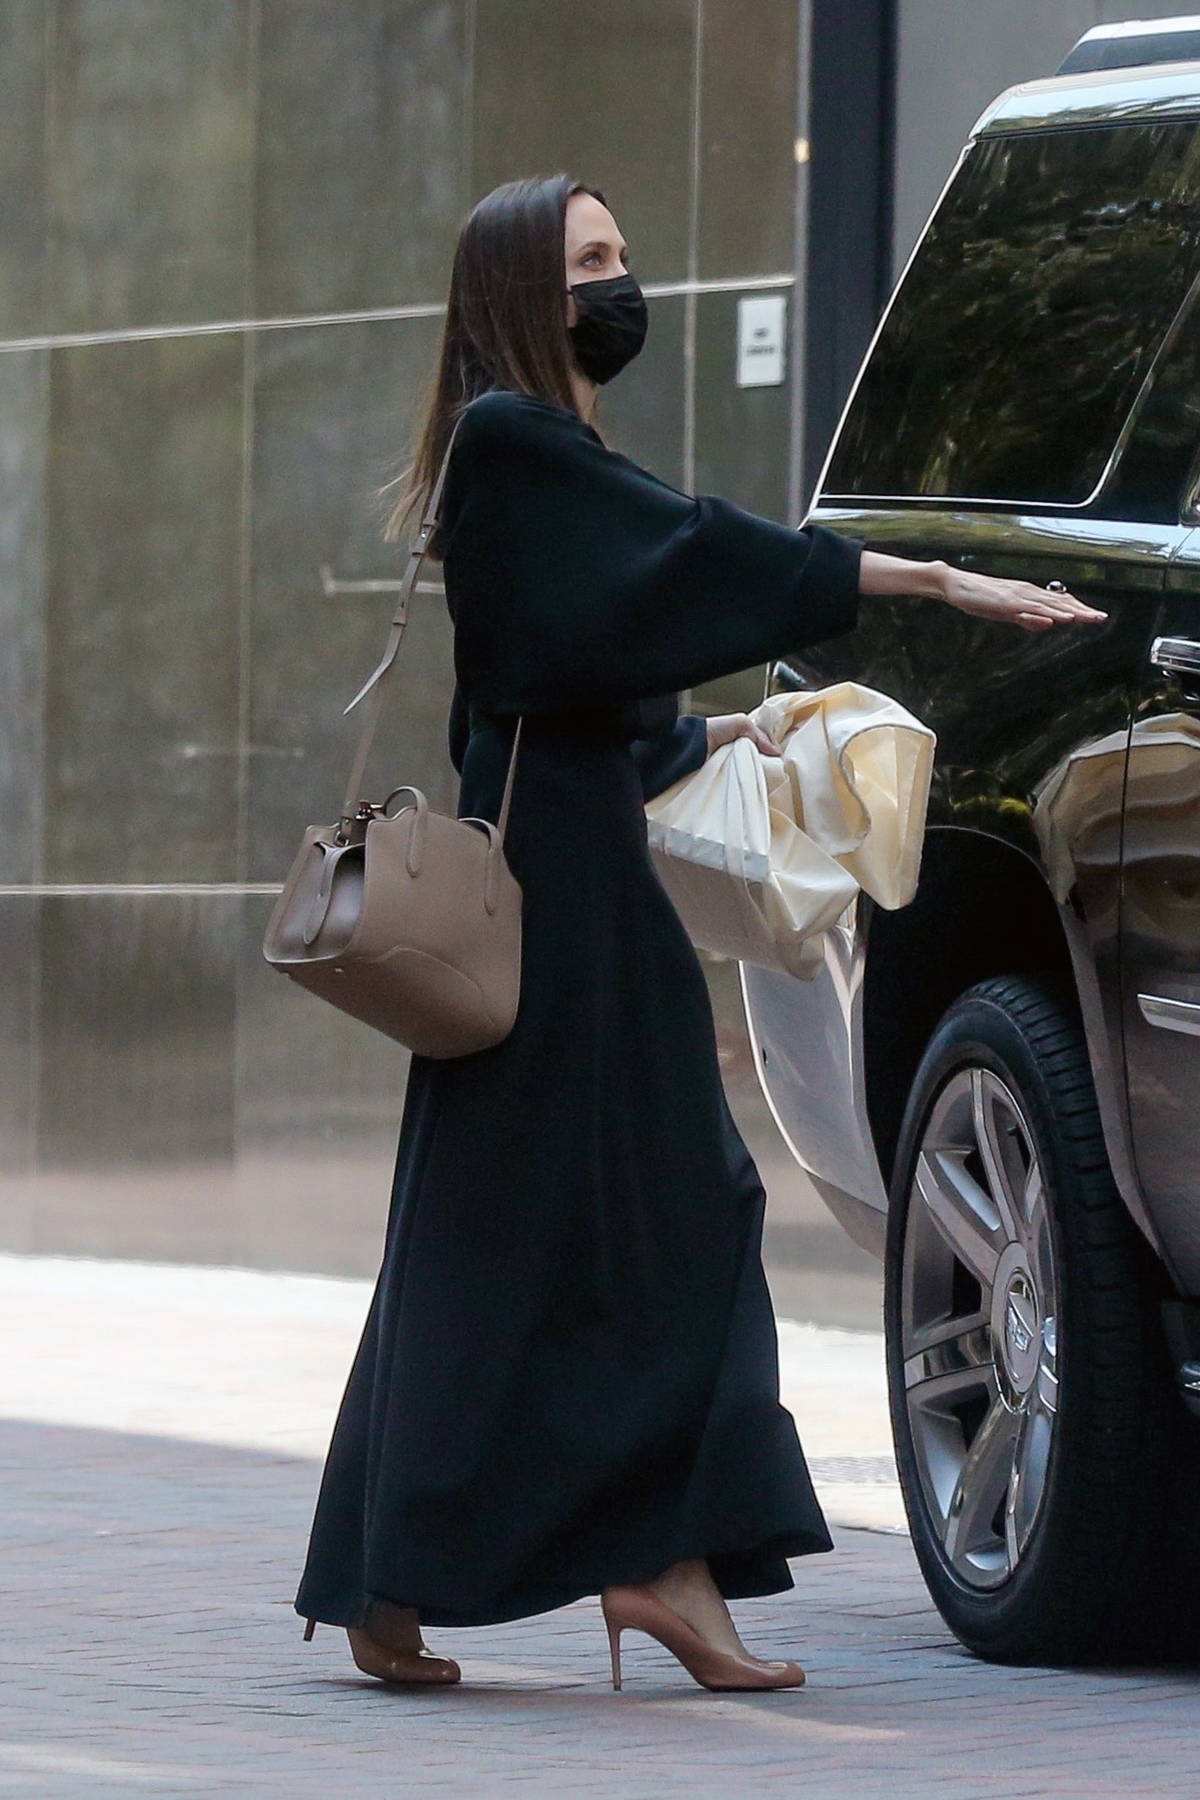 Angelina Jolie Heads to a Business Meeting in New York City